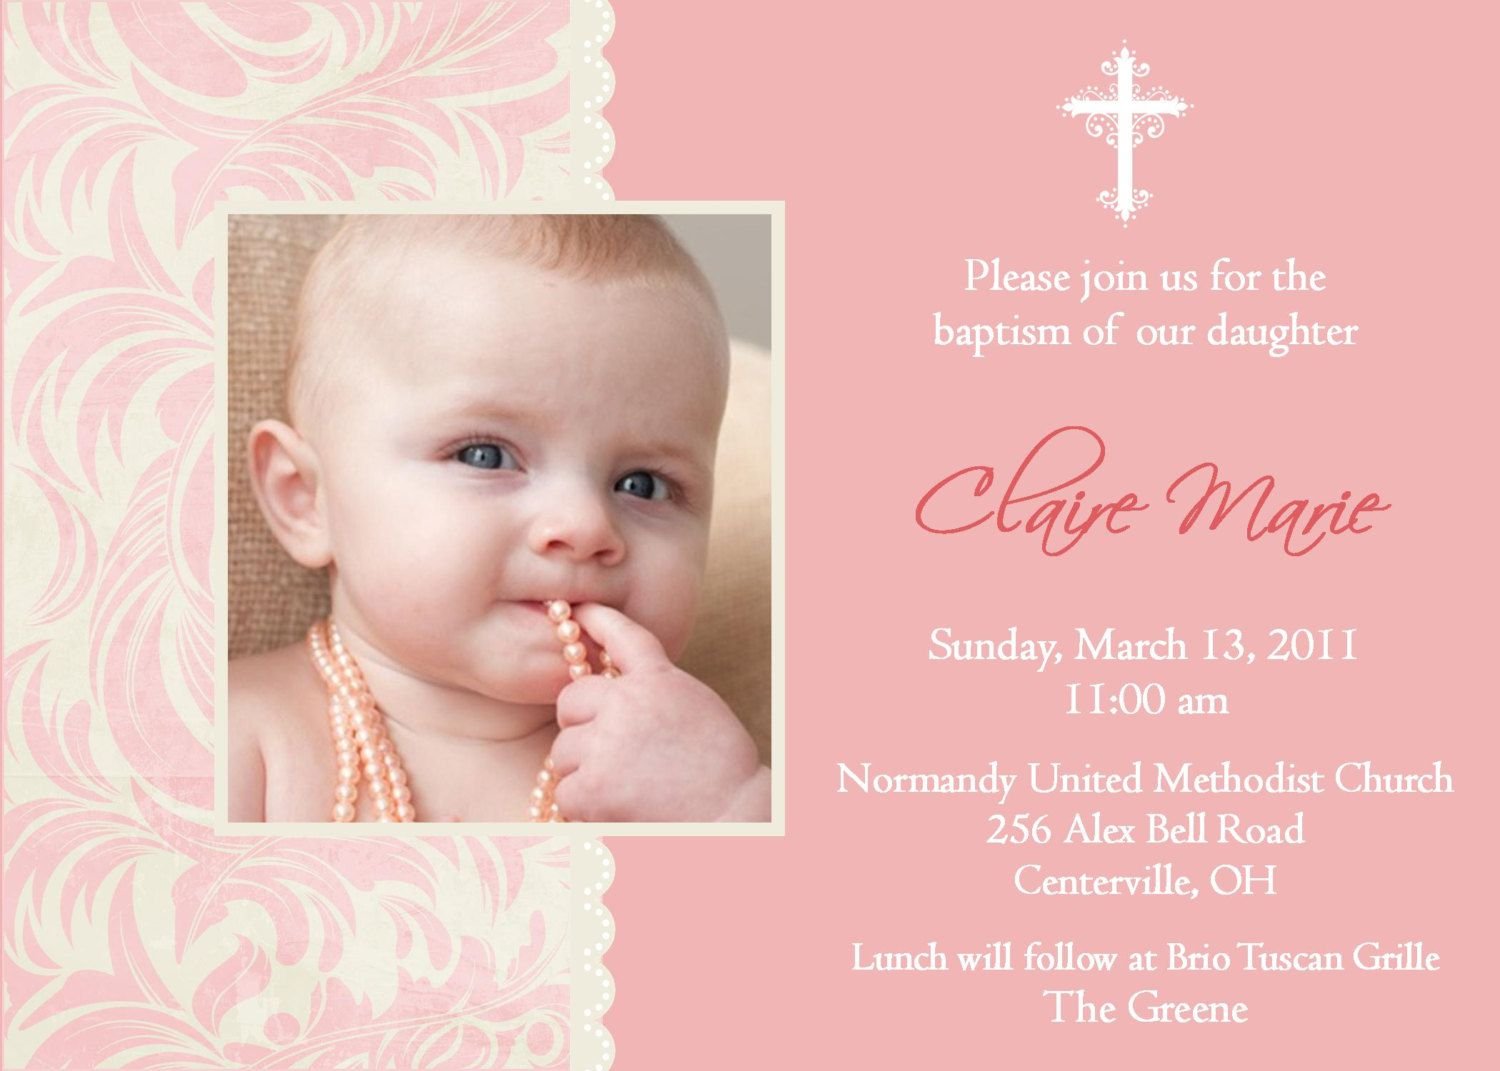 Birthday And Baptism Invitations   First Birthday And Baptism